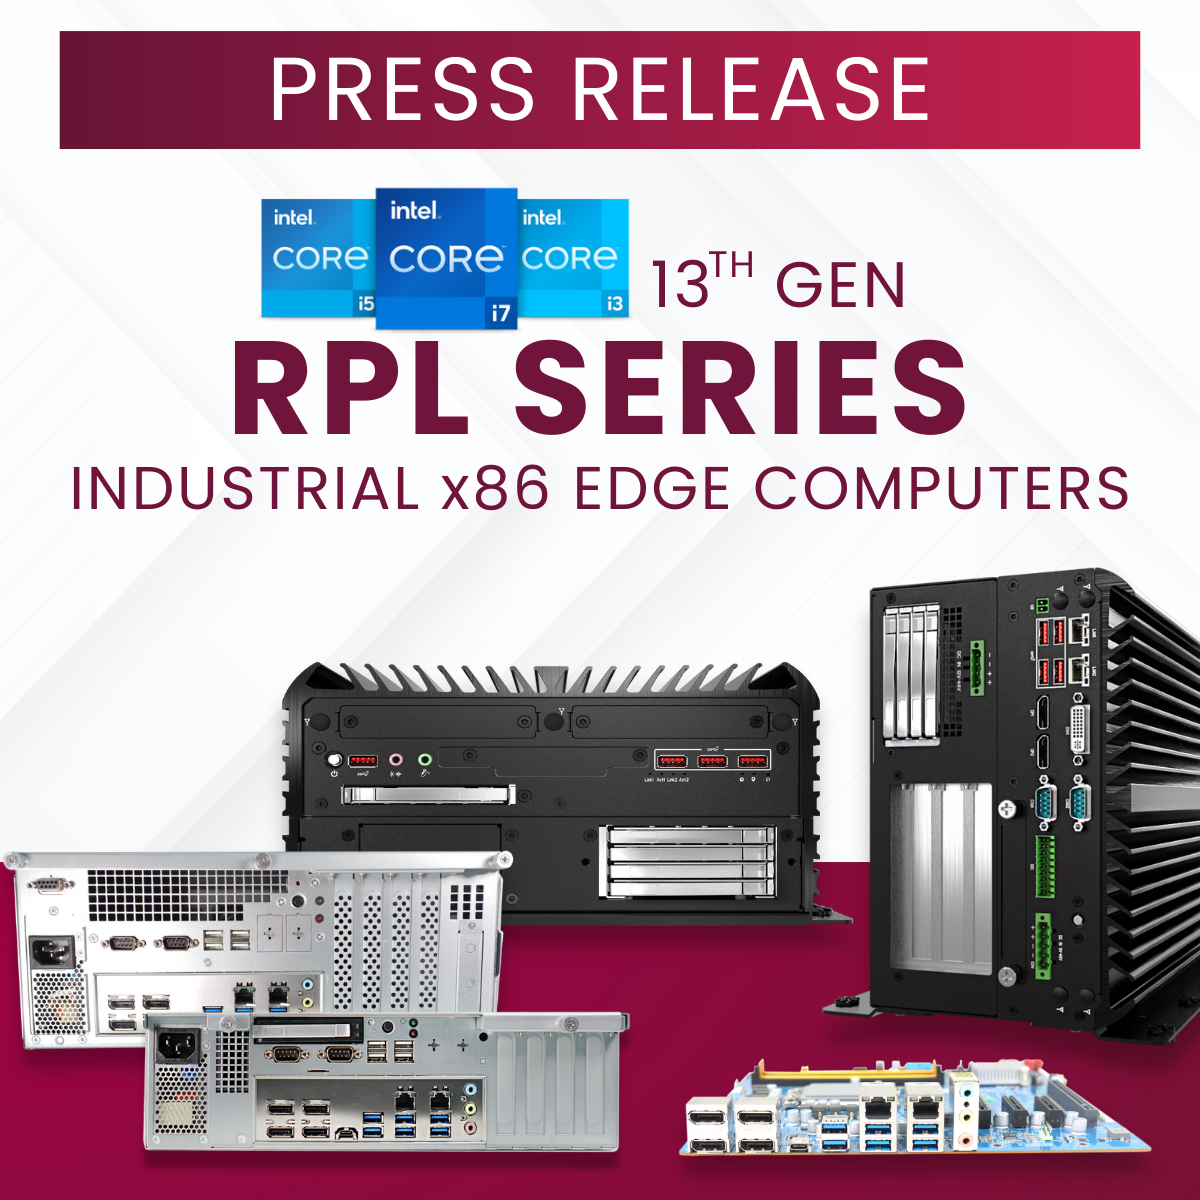 Premio launches 13th Gen Intel Core Series Industrial x86 Edge Computers - AI Edge Inference Computer, Machine Vision Computer, Fanned Industrial Computer, and Industrial mATX Motherboard